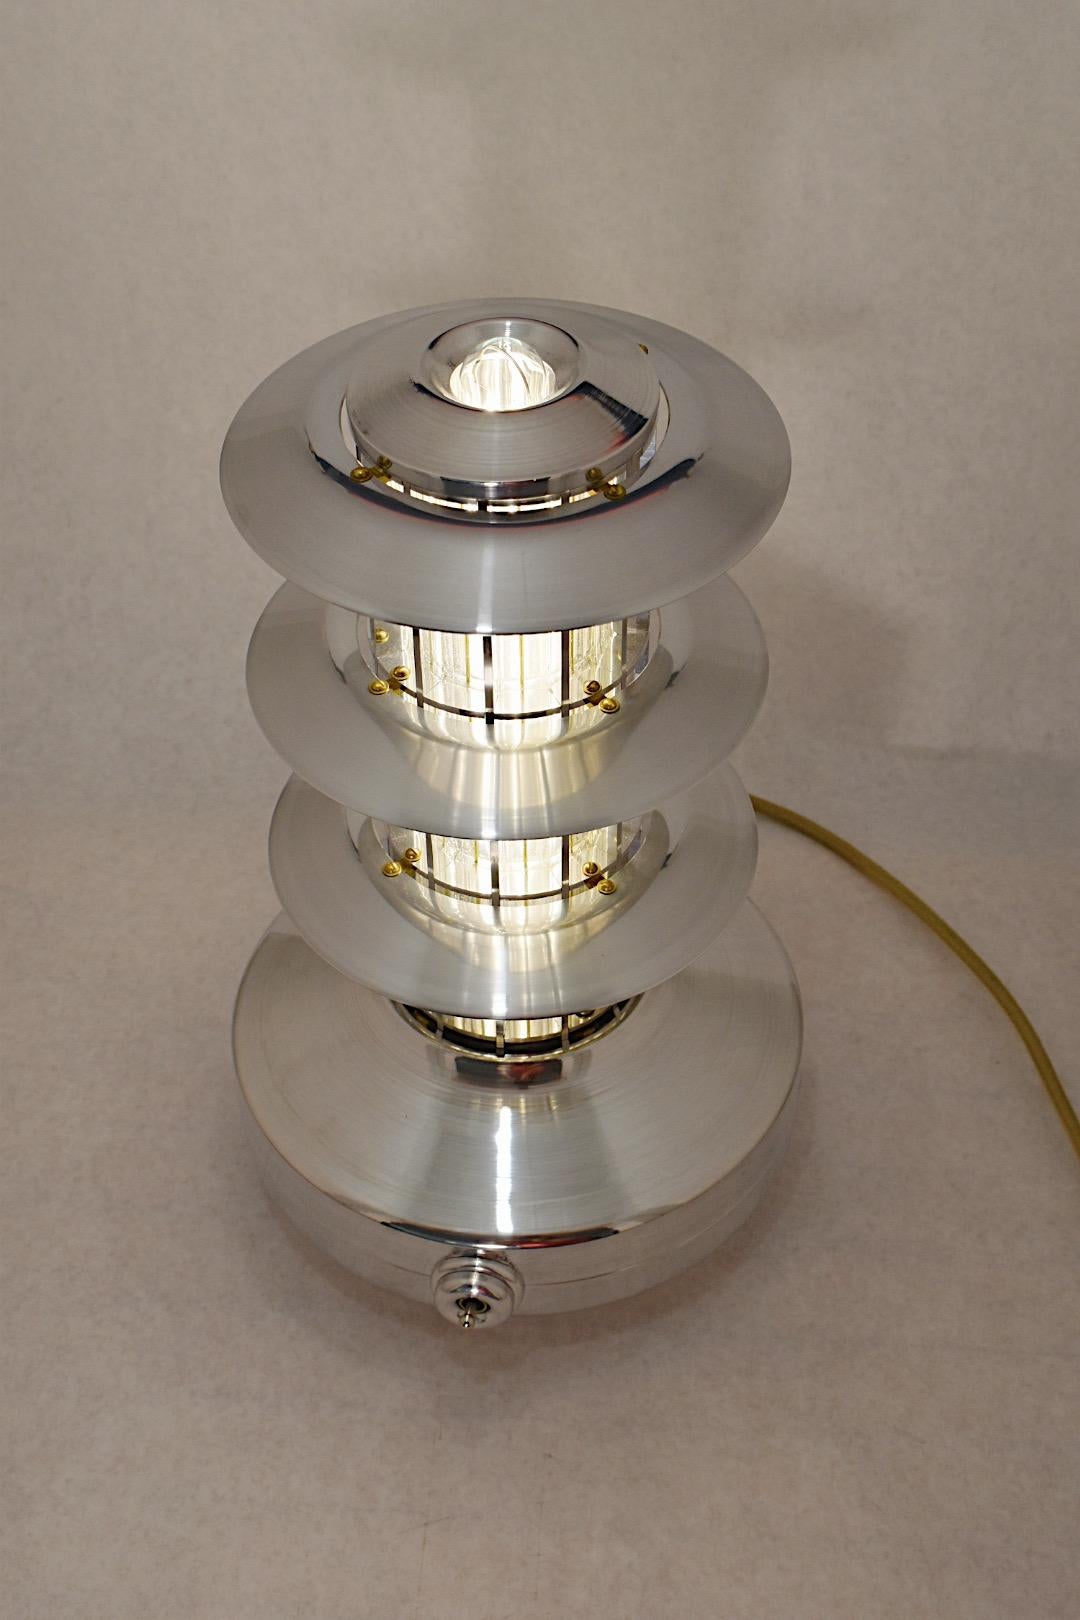 Pagoda Lamp Model 1 is one half of a pair of lamps designed and fabricated during 2021. The inspiration is the Peace Pagoda in San Francisco's Japantown neighborhood designed by Yoshiro Taniguchi, constructed in the 1960s. 
The center column of the